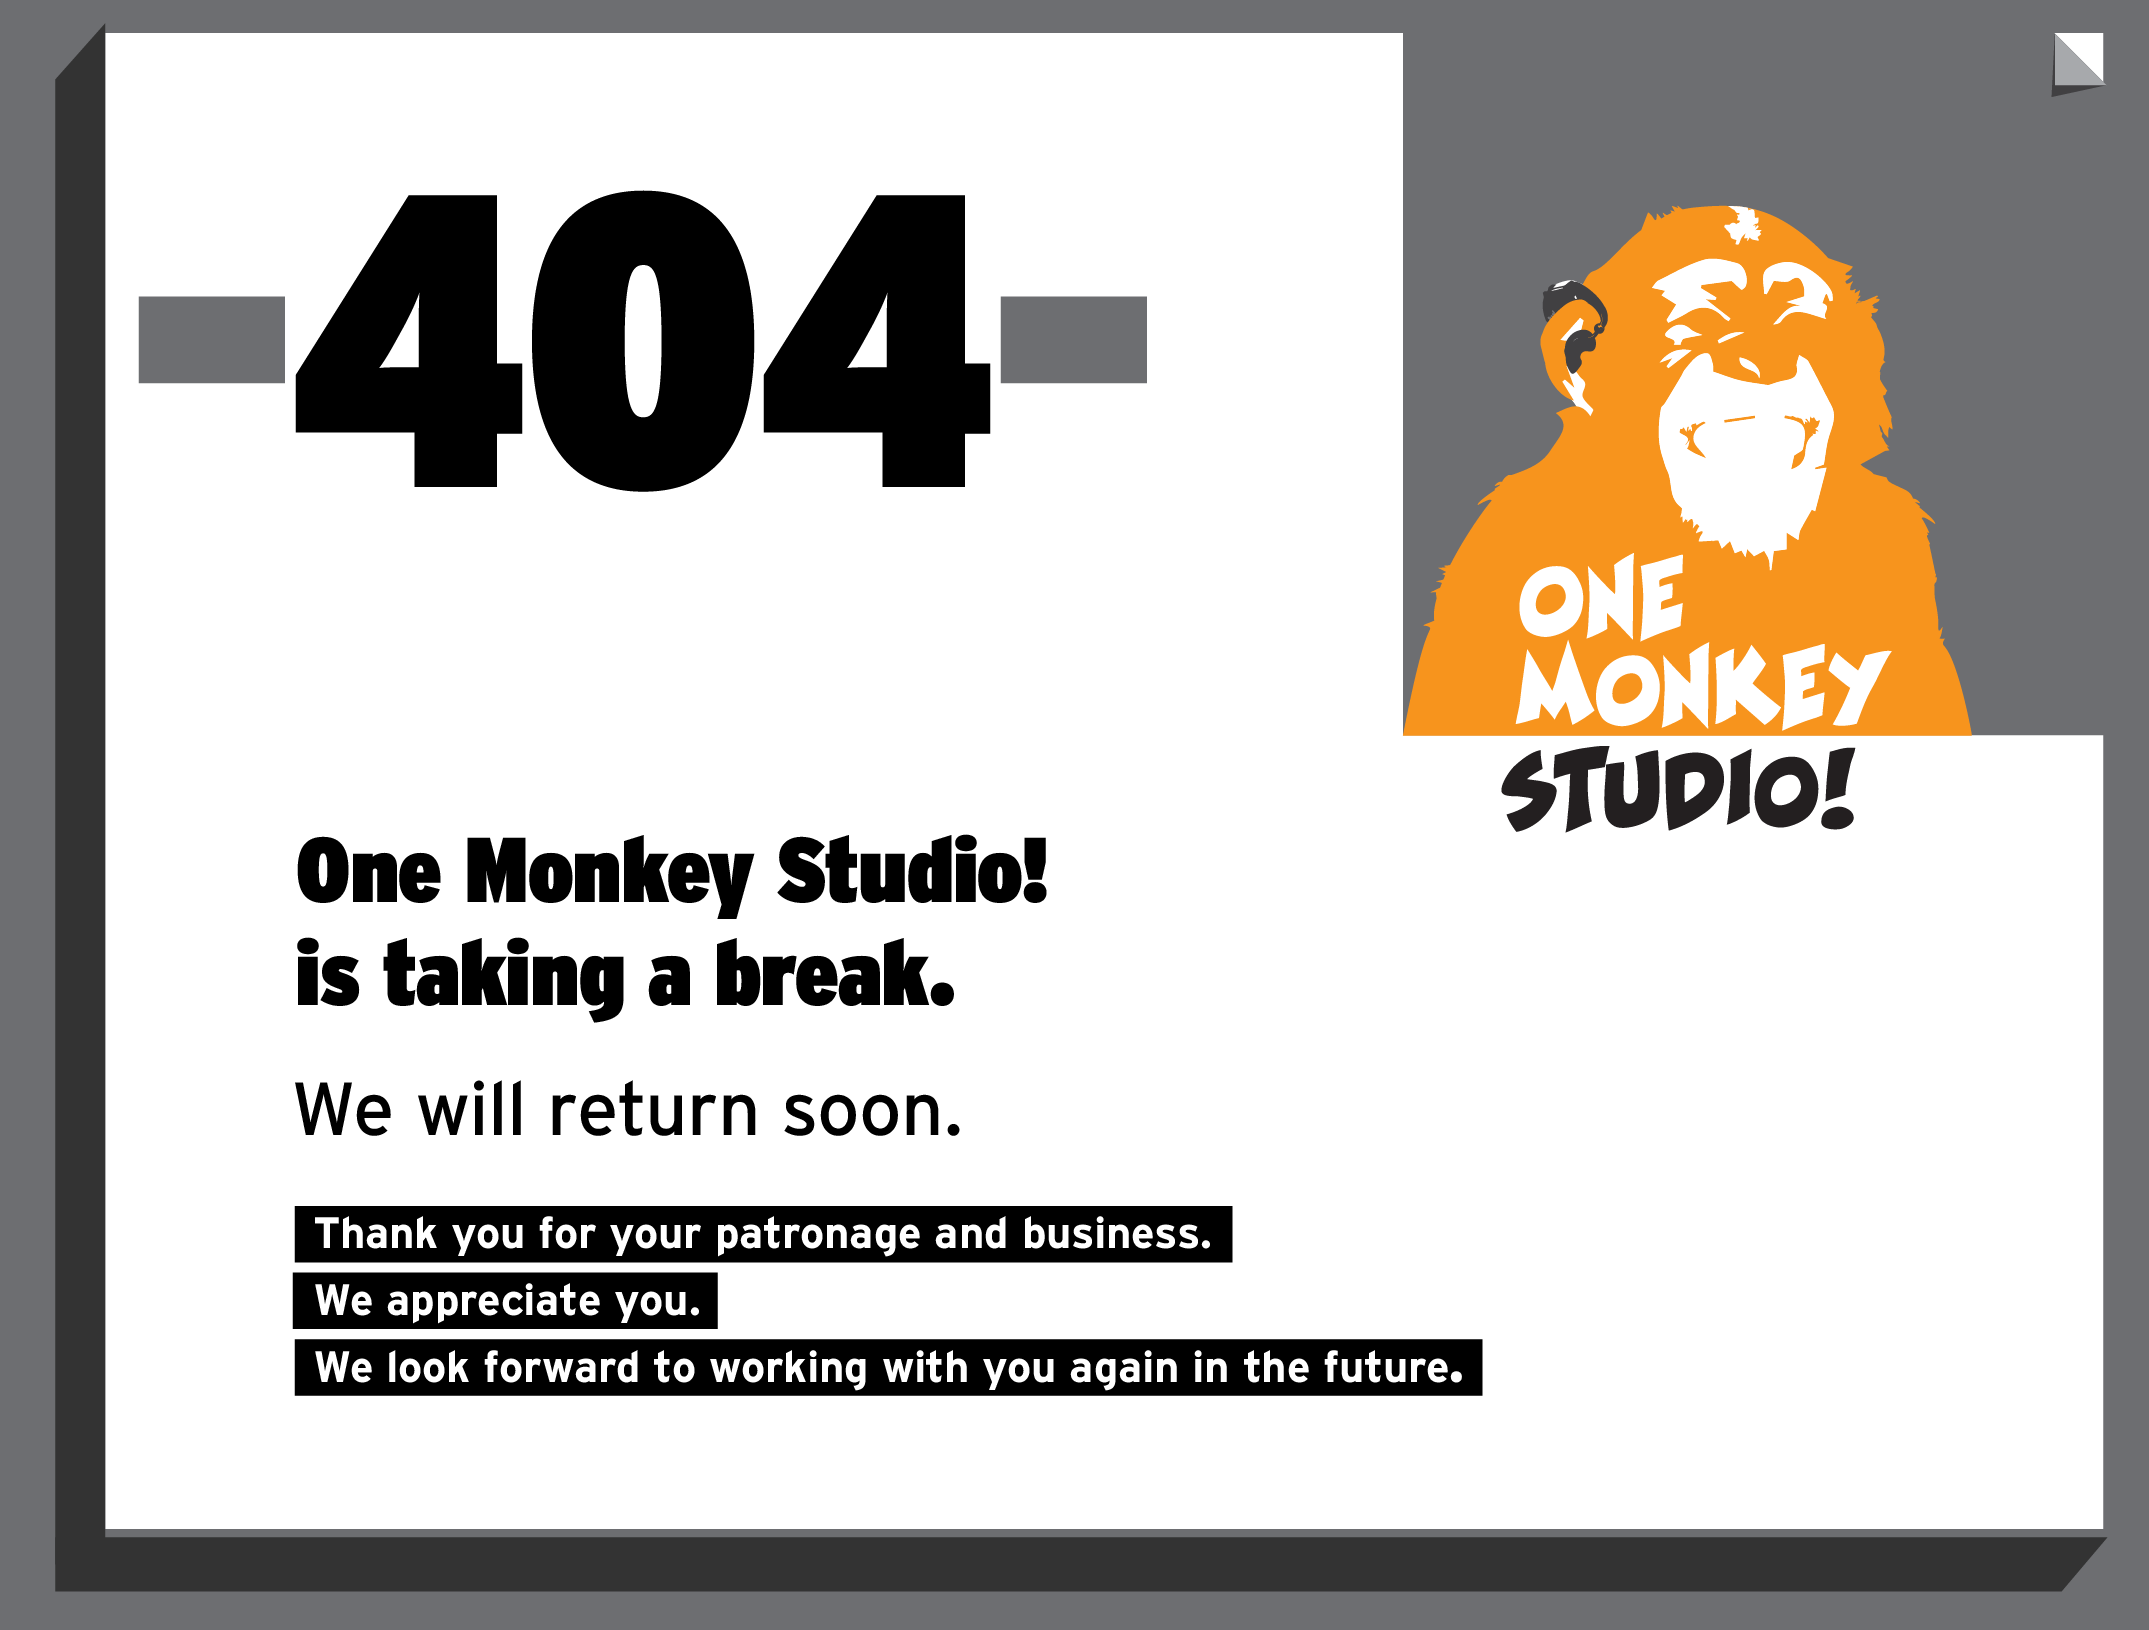 Image announcing temporary closure of One Monkey Studio!  We will return soon.